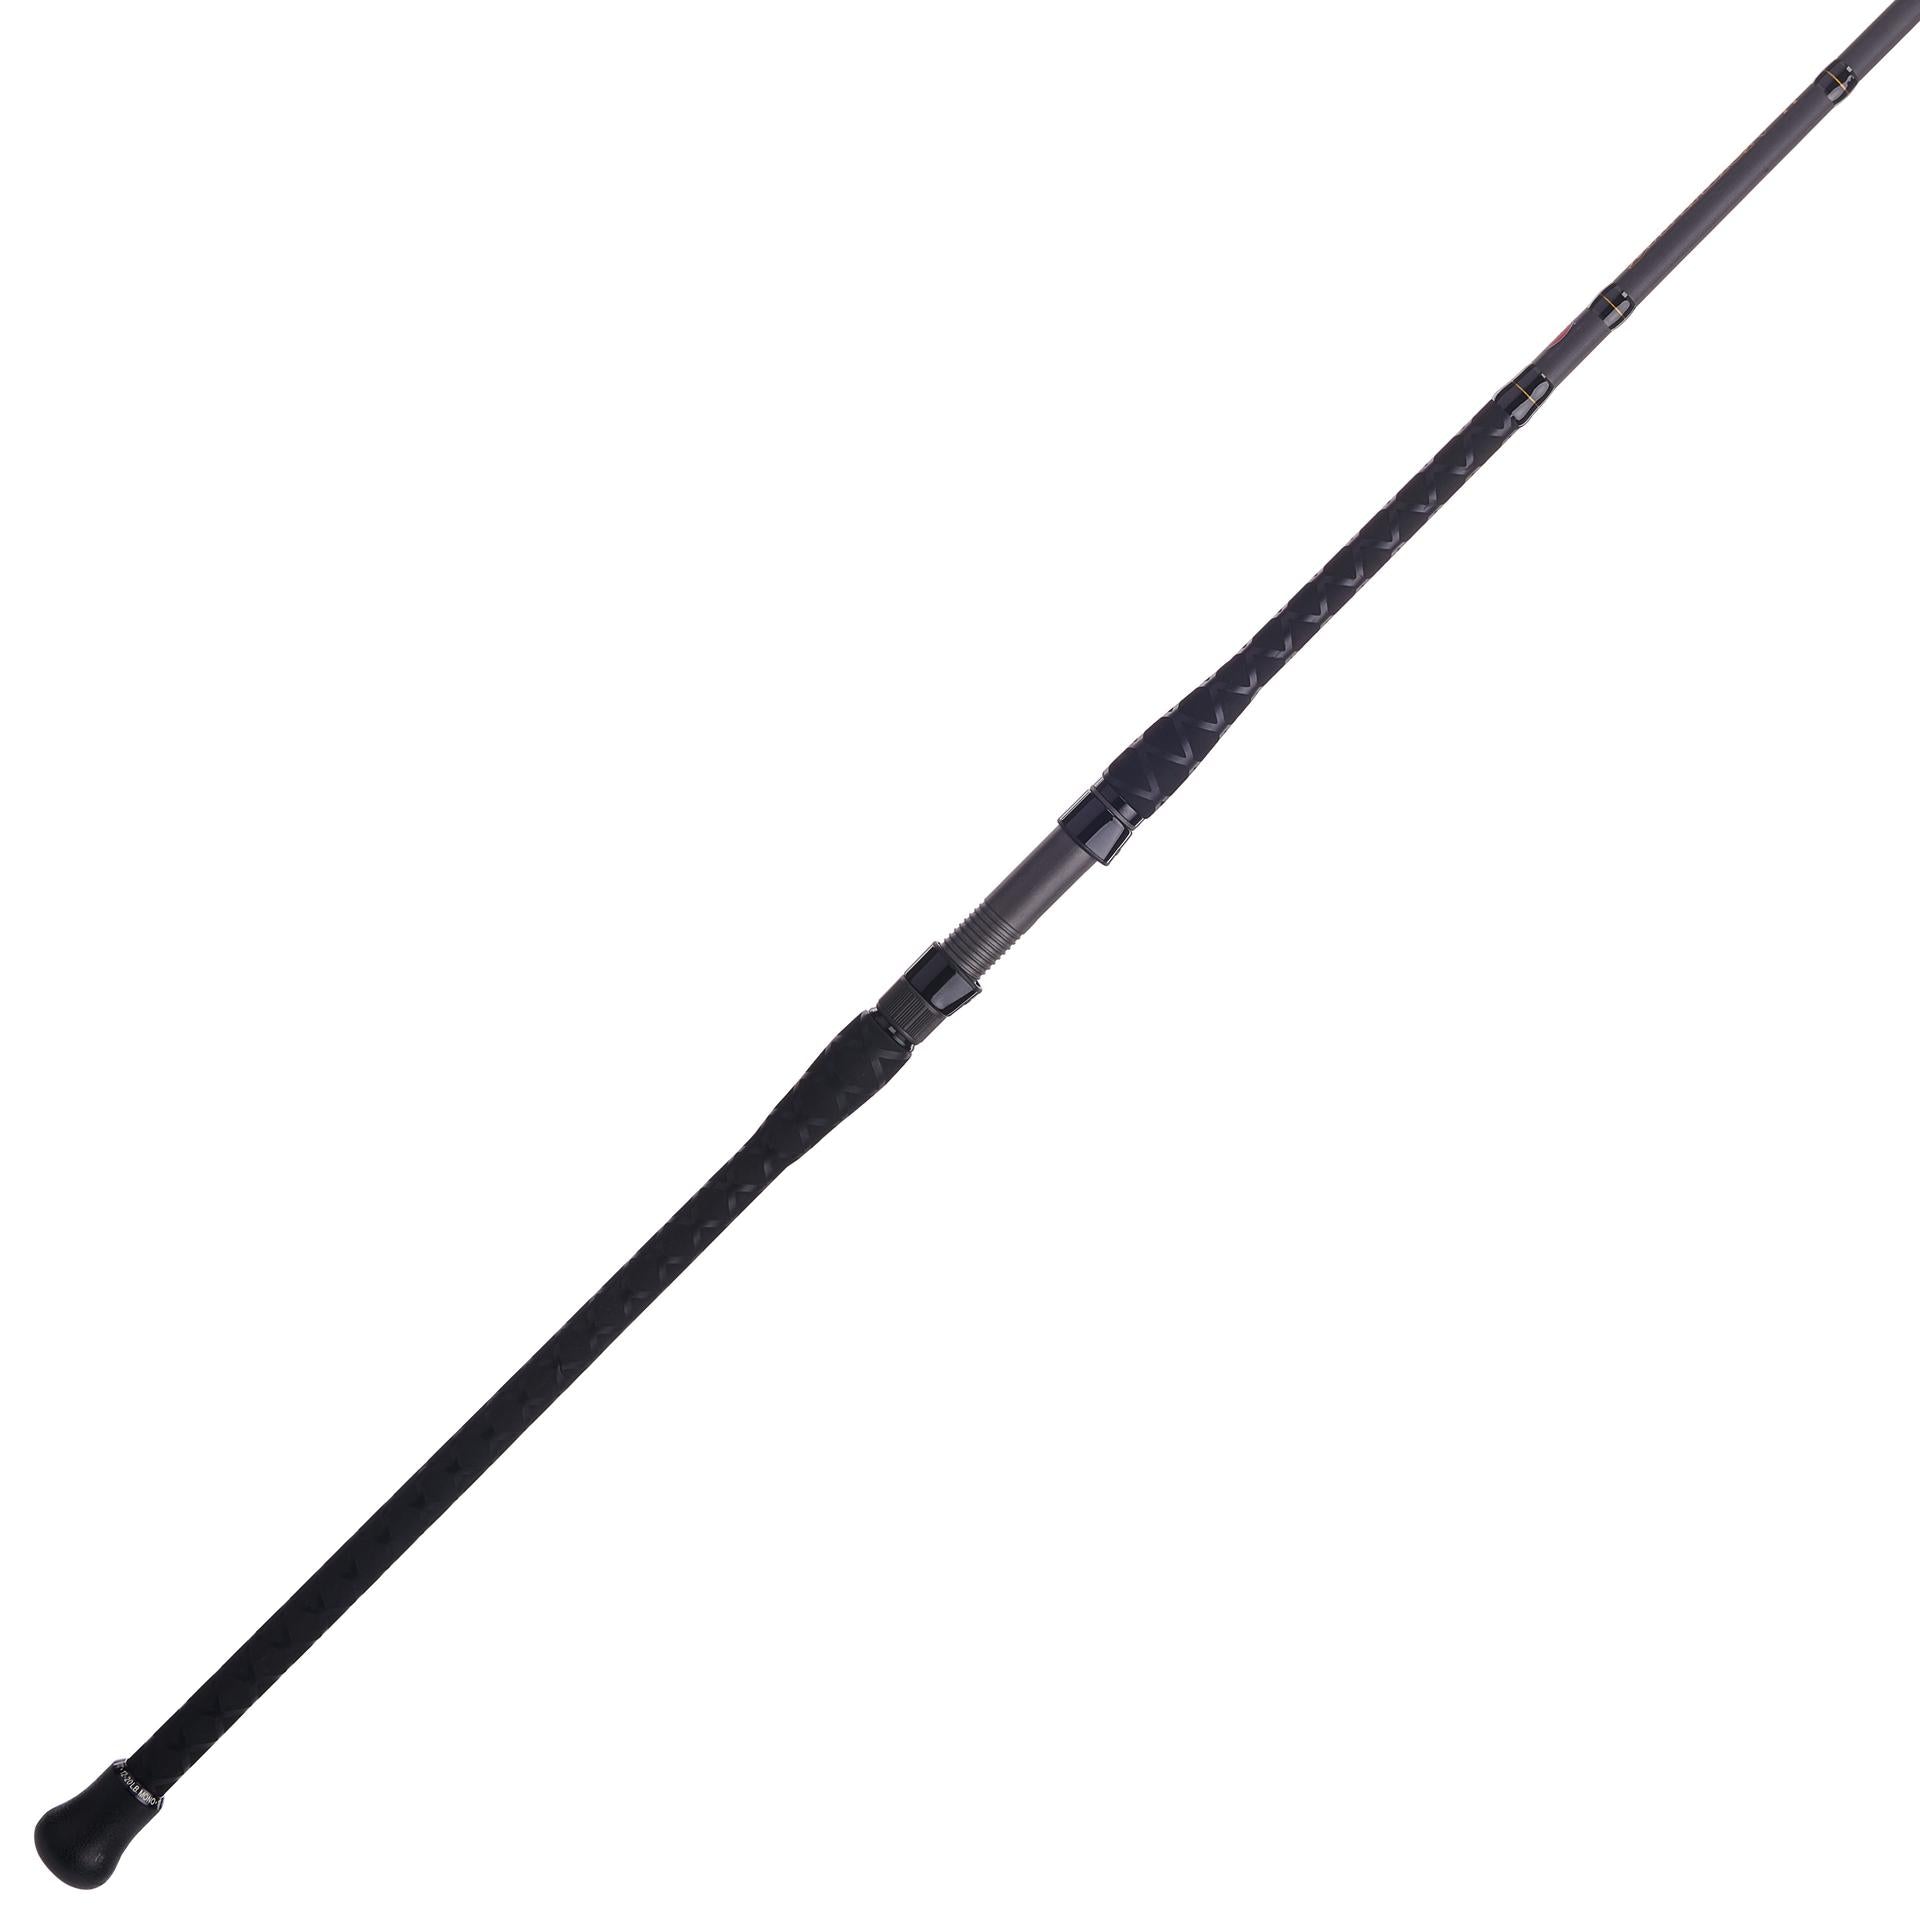 Penn Battalion II Slow Pitch Spinning Rods